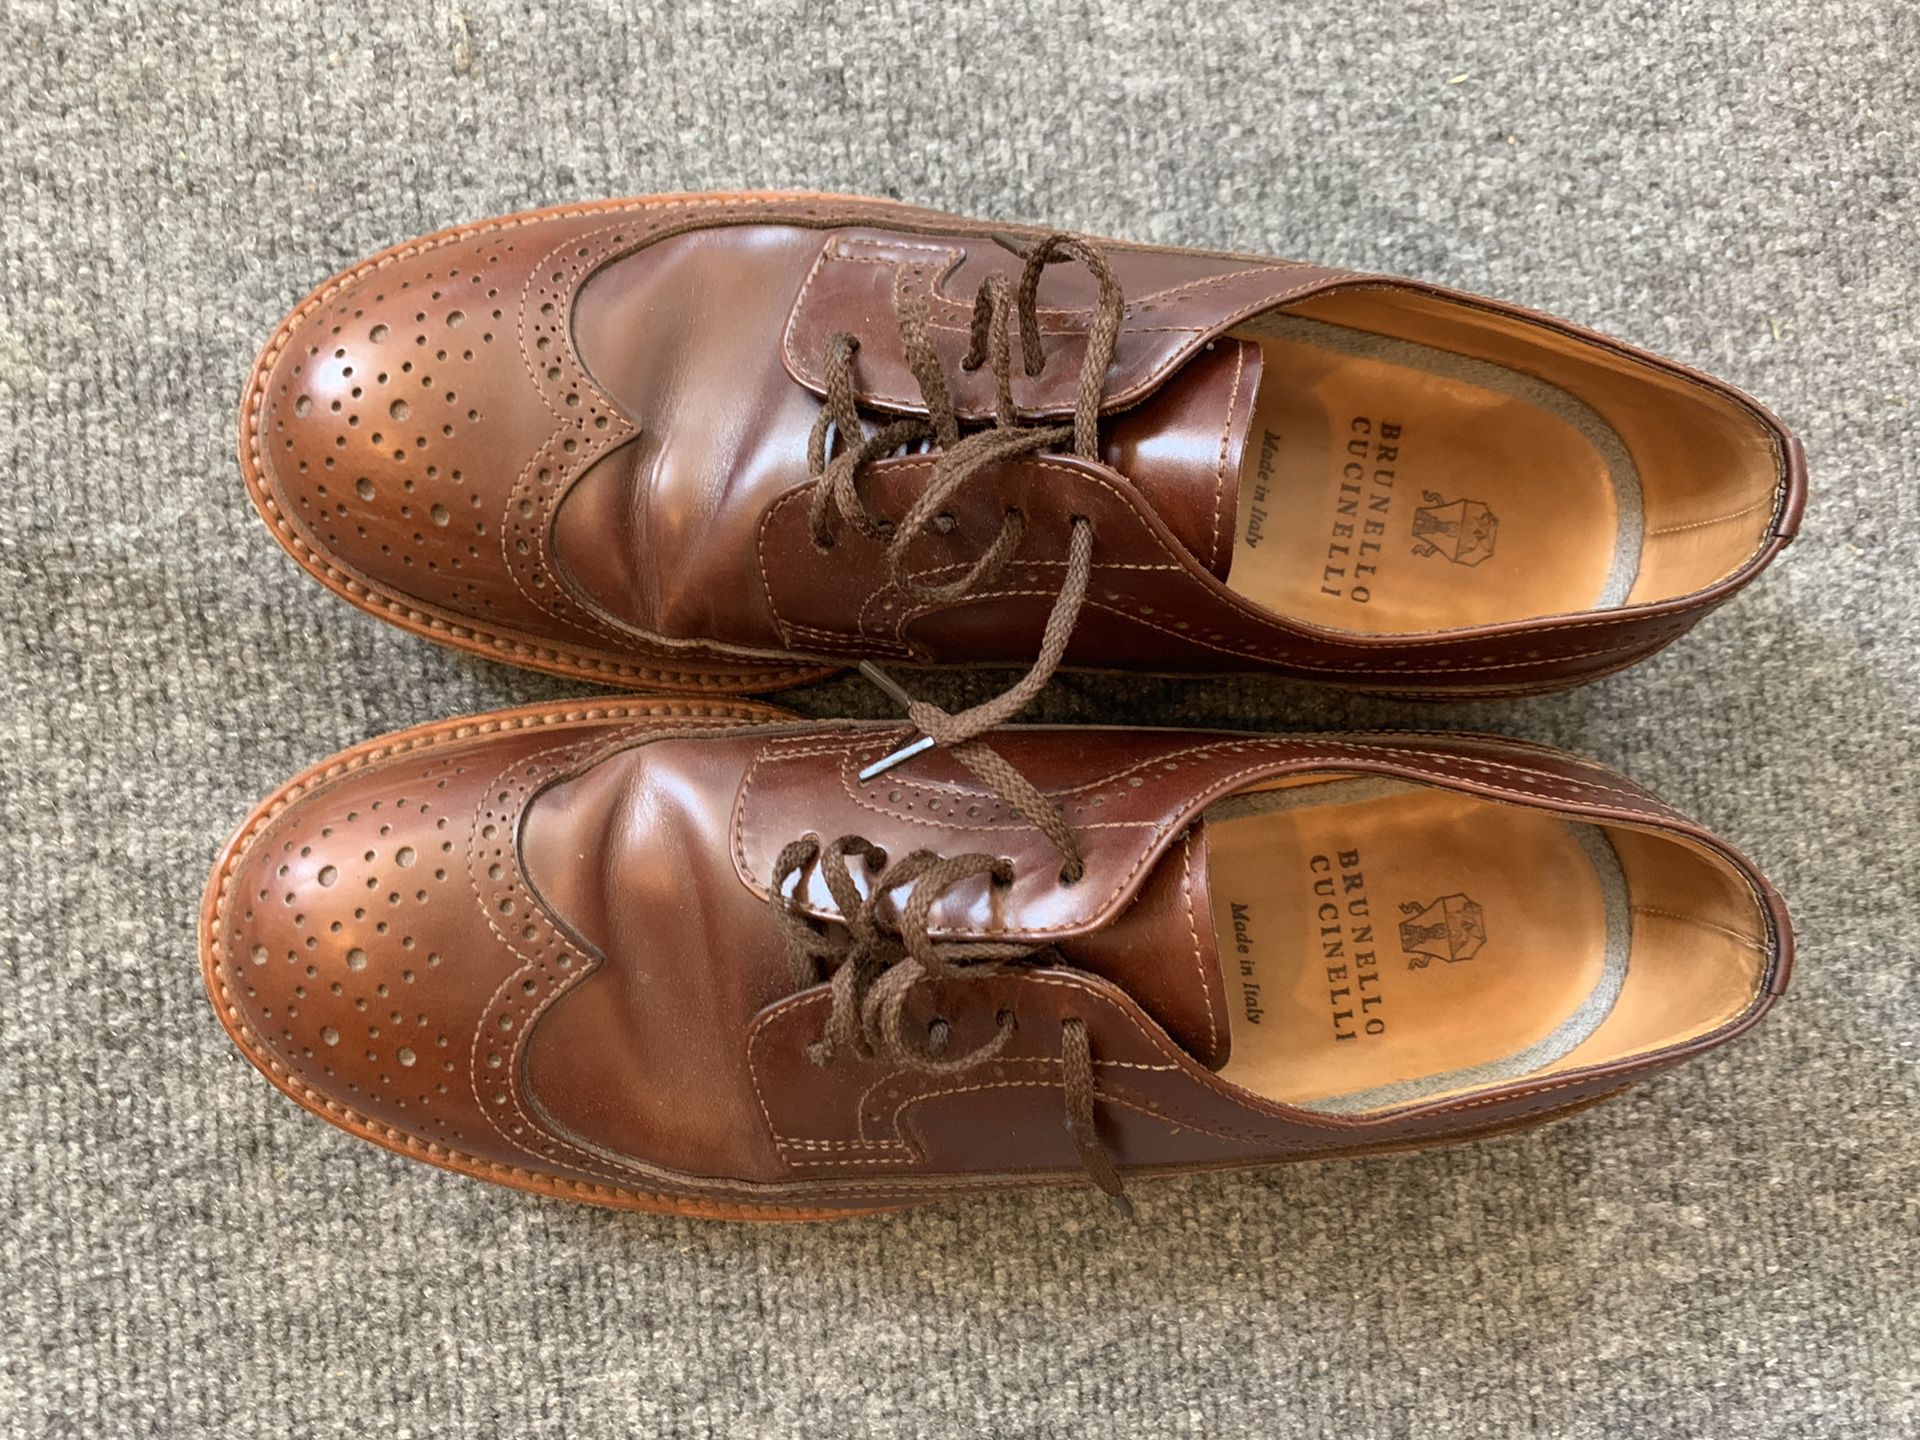 Brunello Cucinelli brown genuine leather business shoes